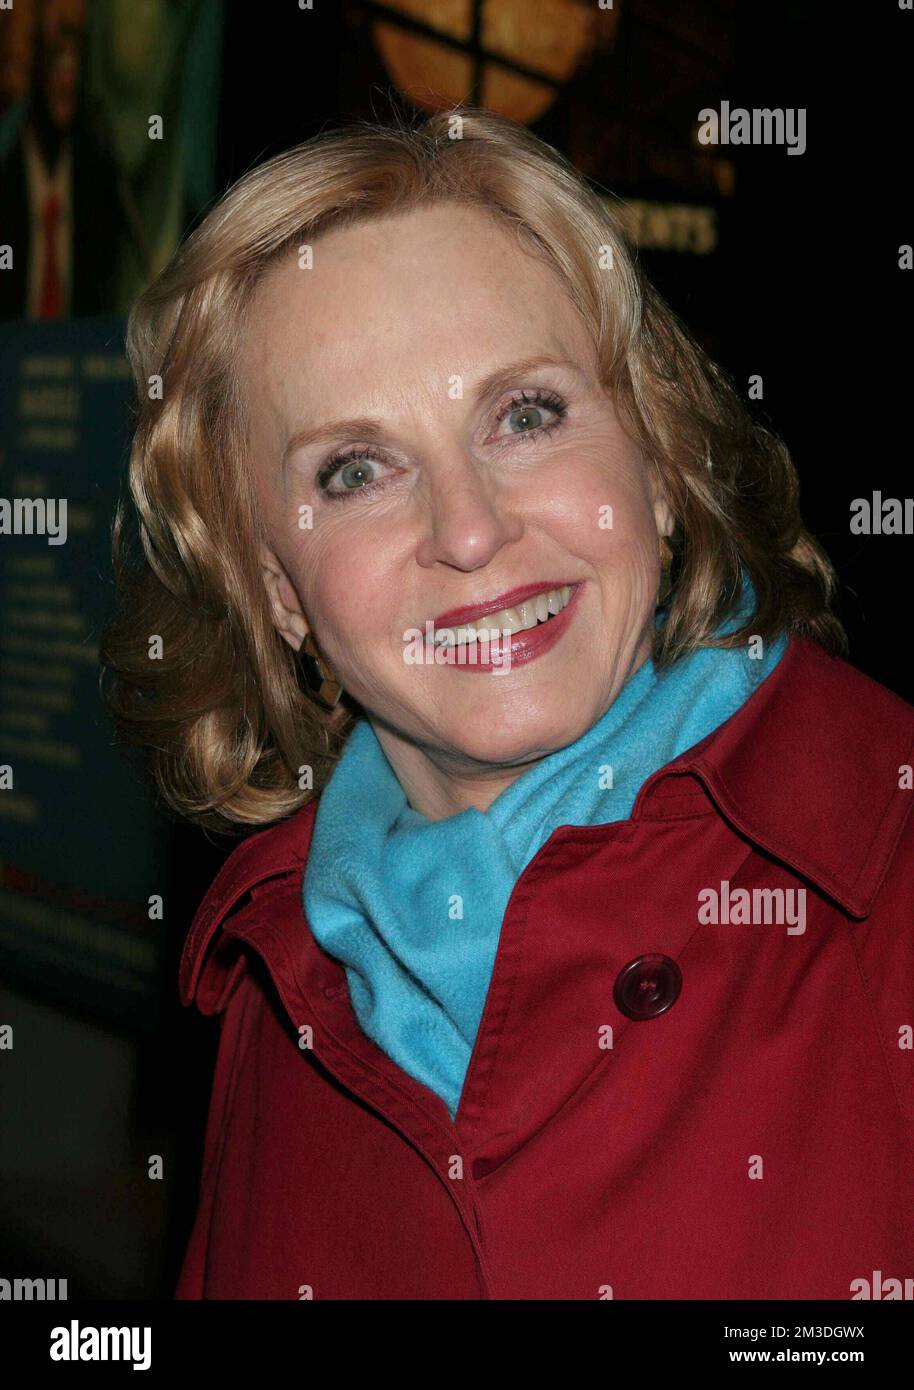 Pia Lindstrom arriving at Celebrating Luigi, A Tribute To Luigi For His 80th Birthday at The Laura Pels Theatre in New York City on March 20, 2005.  Photo Credit: Henry McGee/MediaPunch Stock Photo